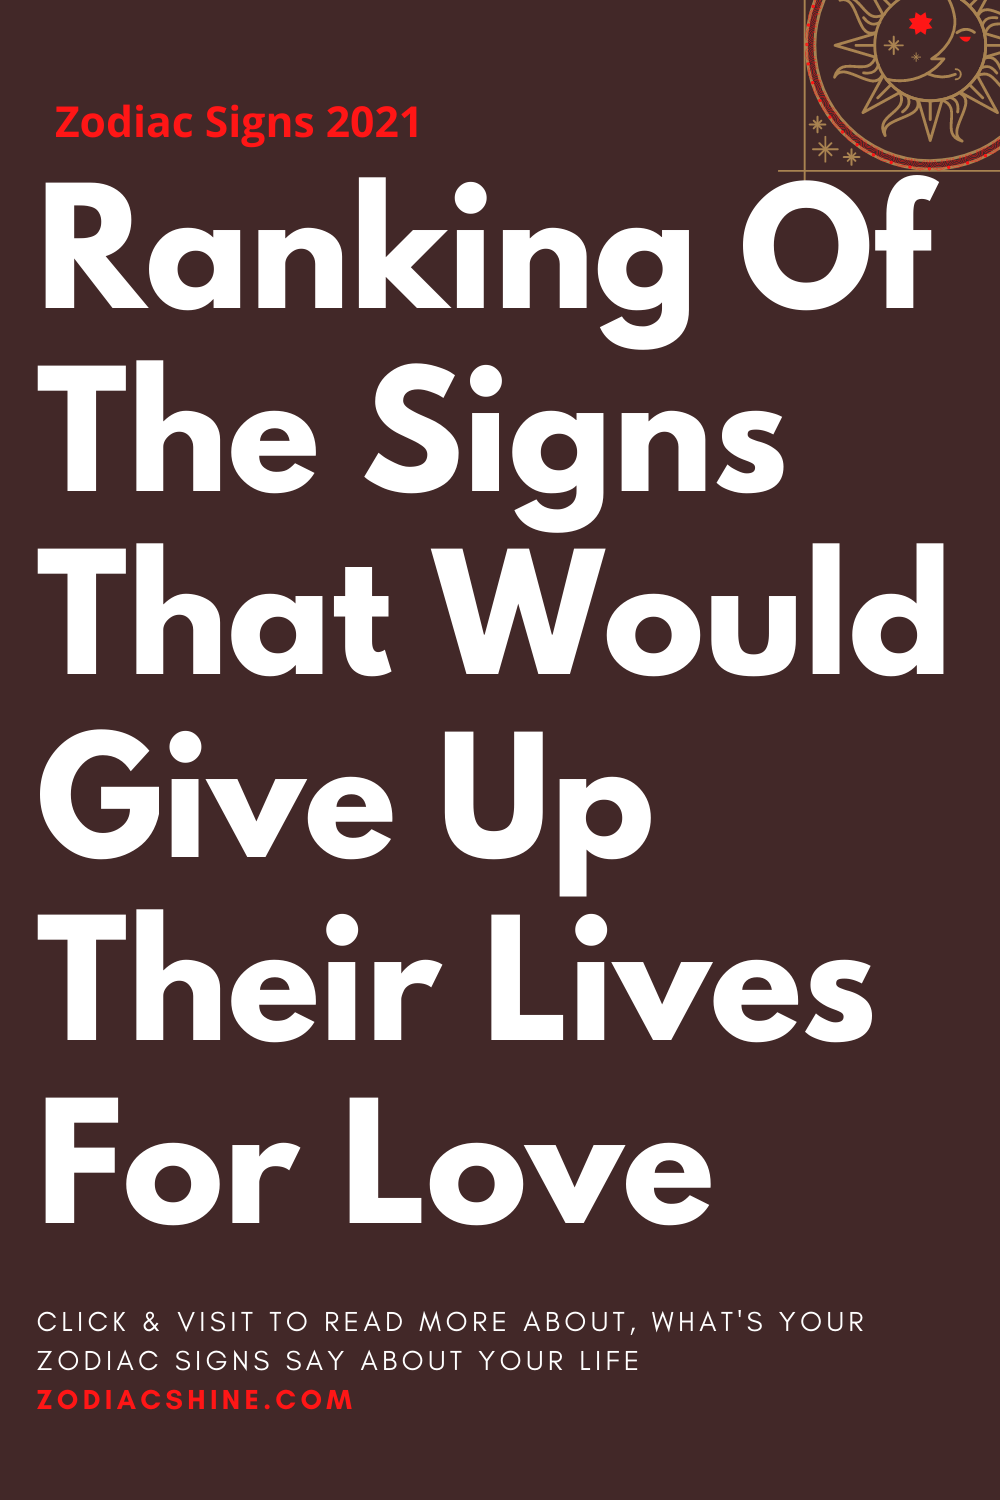 Ranking Of The Signs That Would Give Up Their Lives For Love